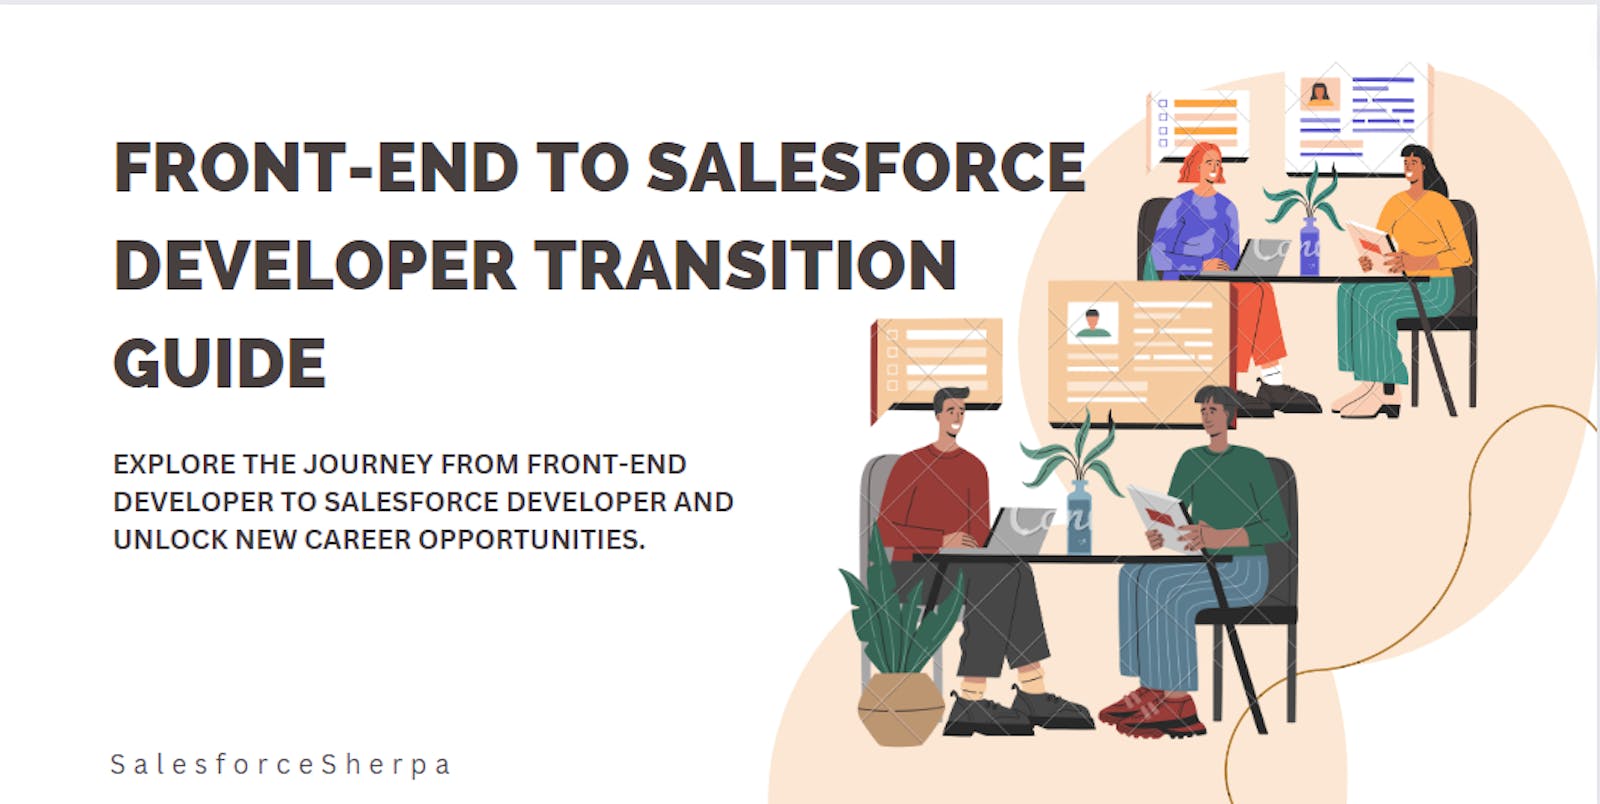 From Working as a Front-End Developer to Salesforce Developer: A Career Transition Guide.